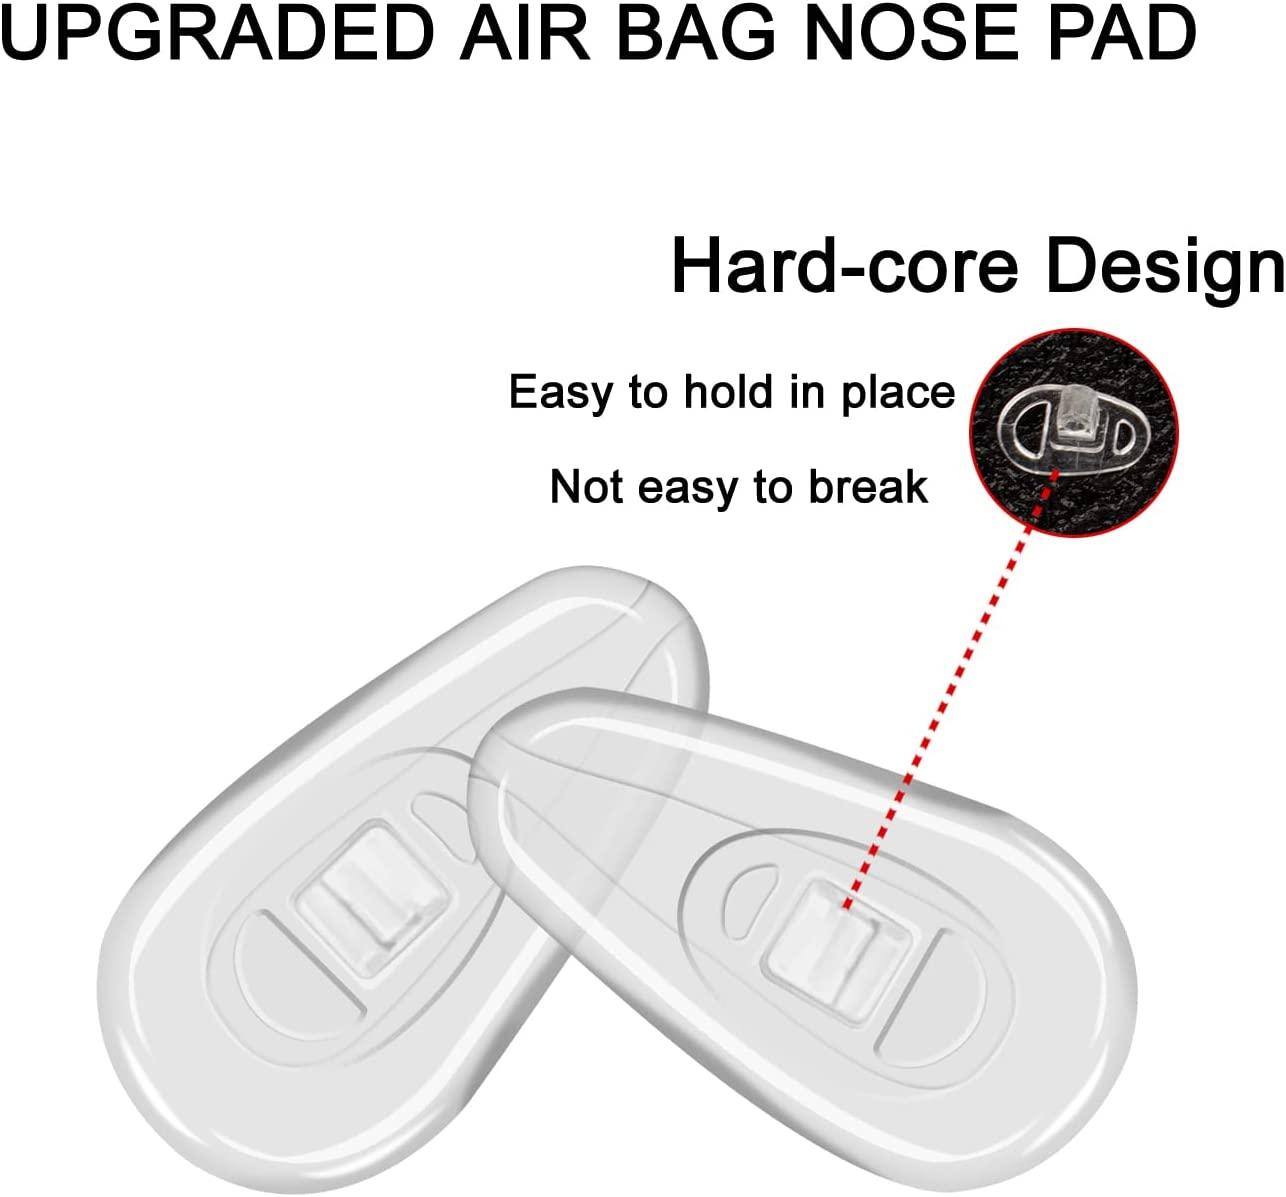 Mr.ZZ Mr.Zz Eyeglasses Nose Pads, Upgraded Soft Silicone Air